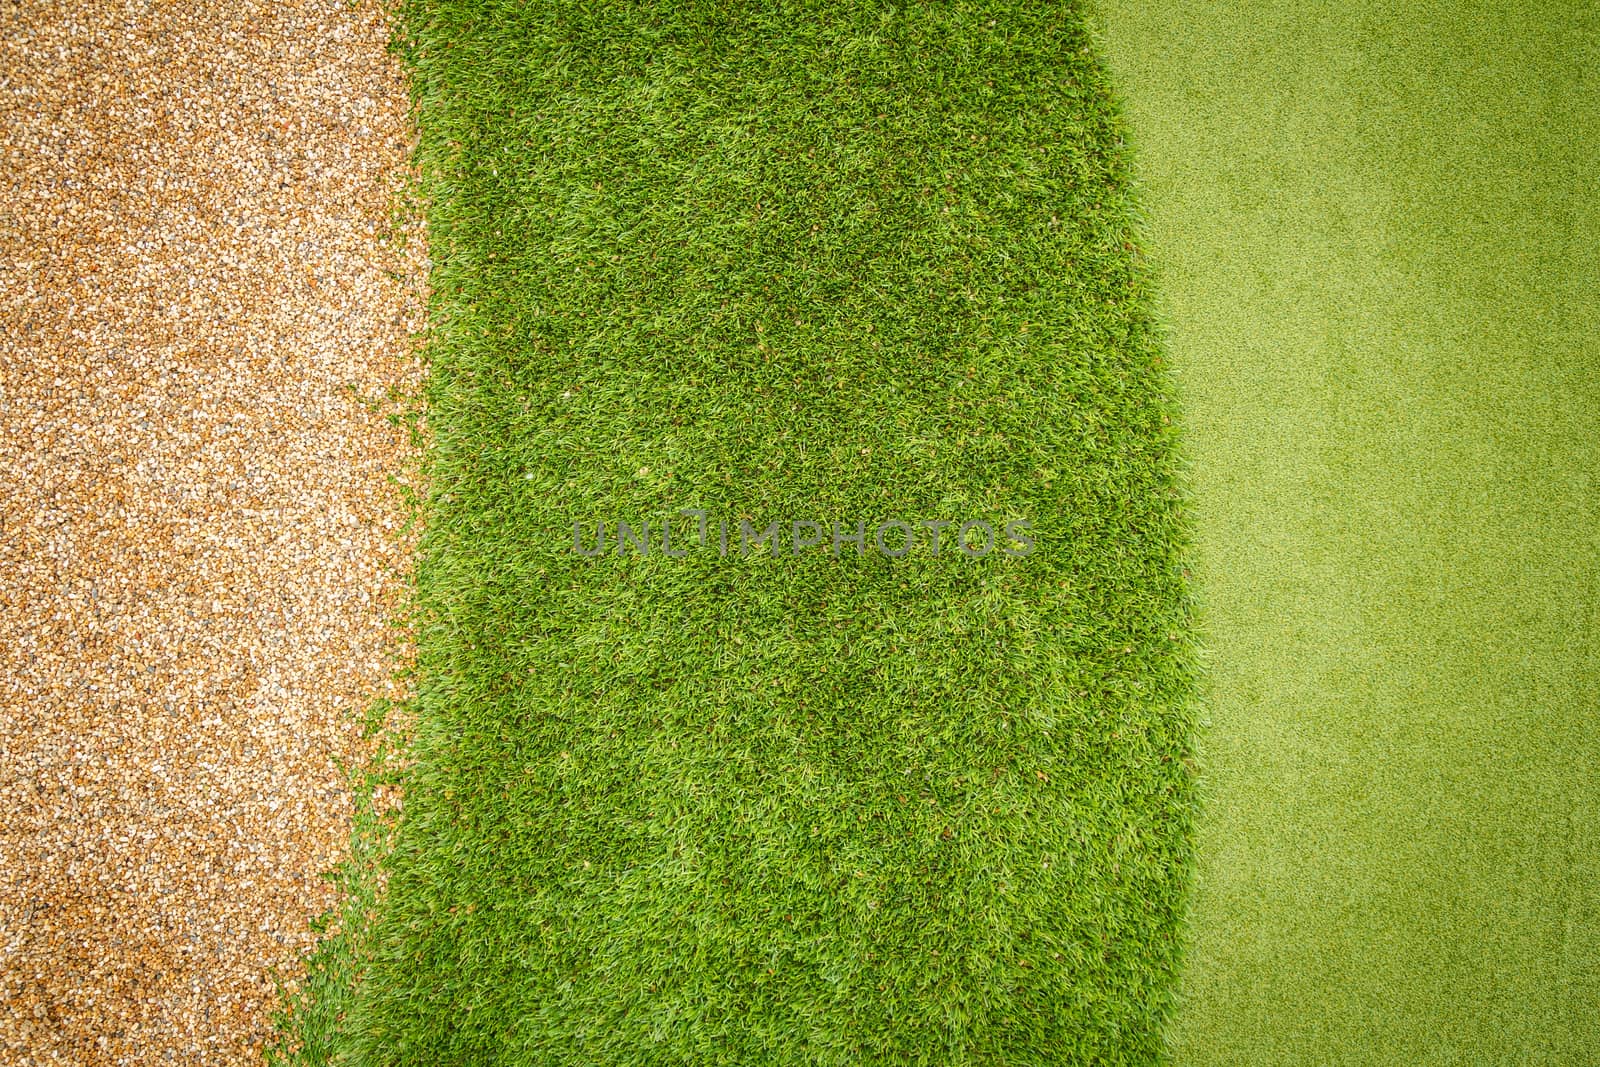 green grass and gravel pattern by letoakin